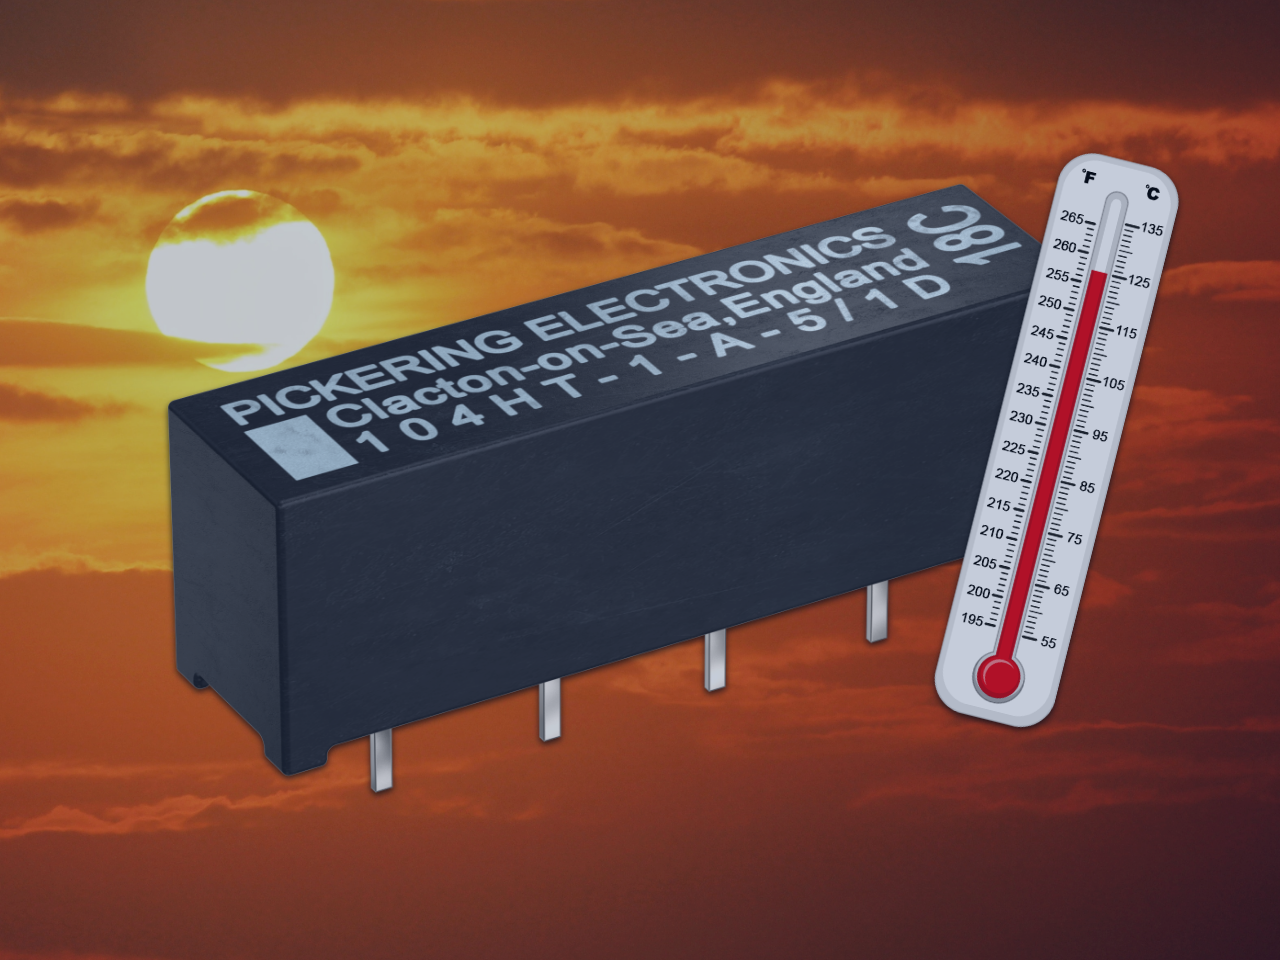 Miniature High Voltage Reed Relay From Pickering now Rated up to 150°C